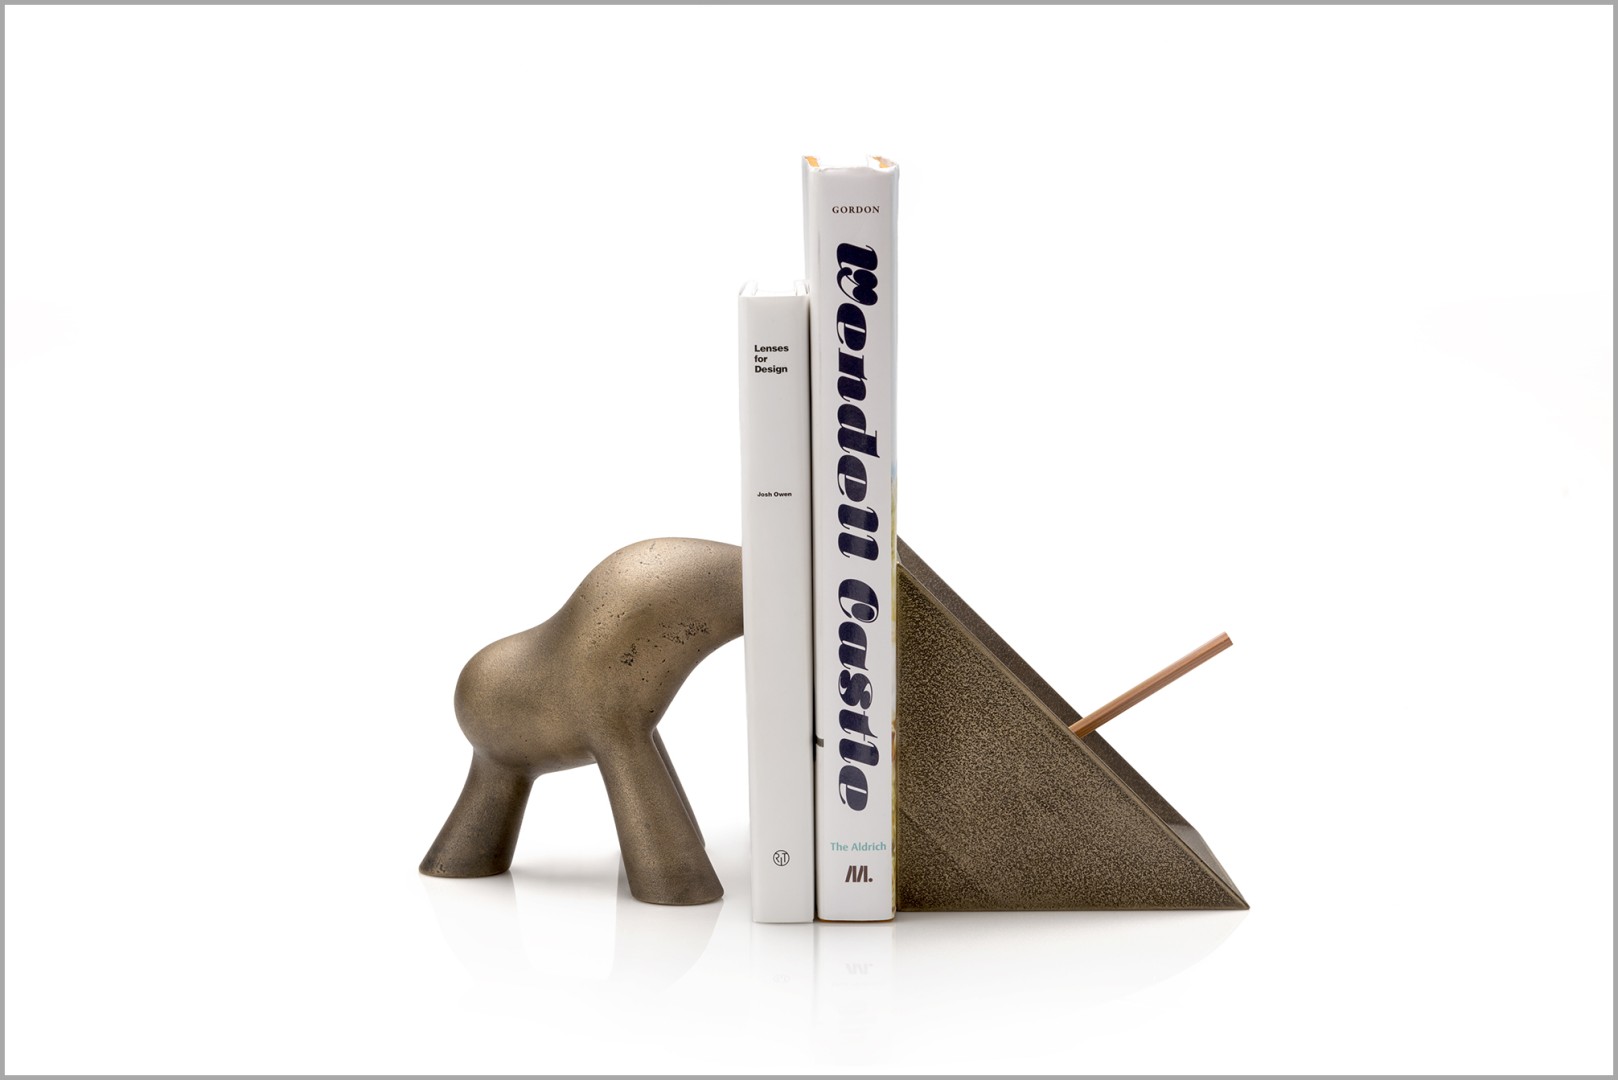 Bookends designed by Wendell Castle and Josh Owen.